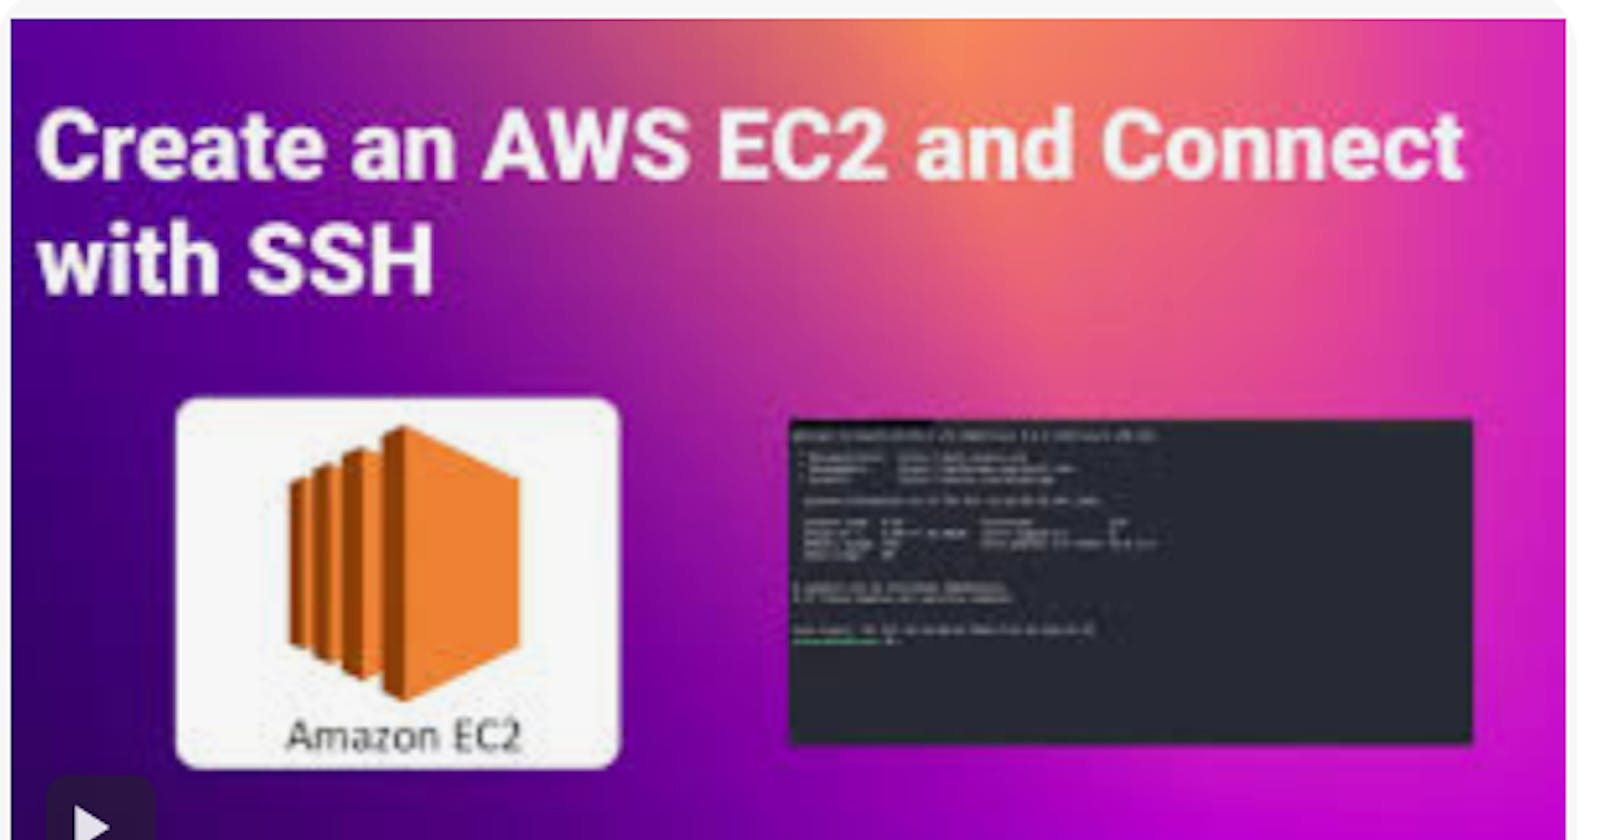 Connect on your EC2 instances with Local host by ssh